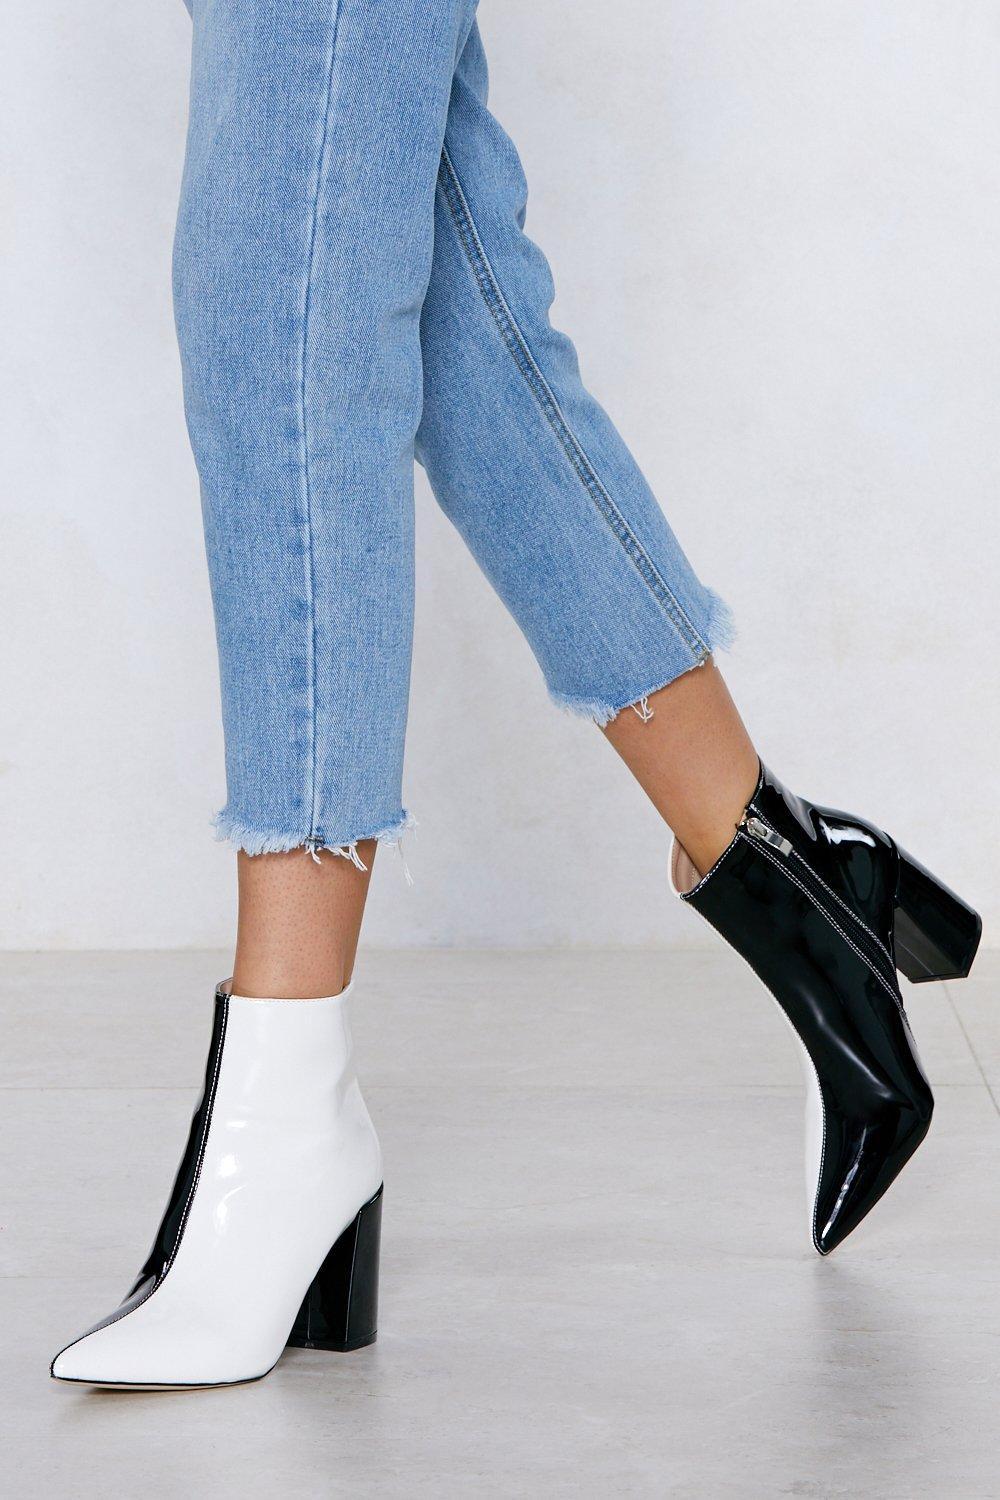 Nasty Gal Two Tone Pointed Toe Heeled Boots in Black | Lyst